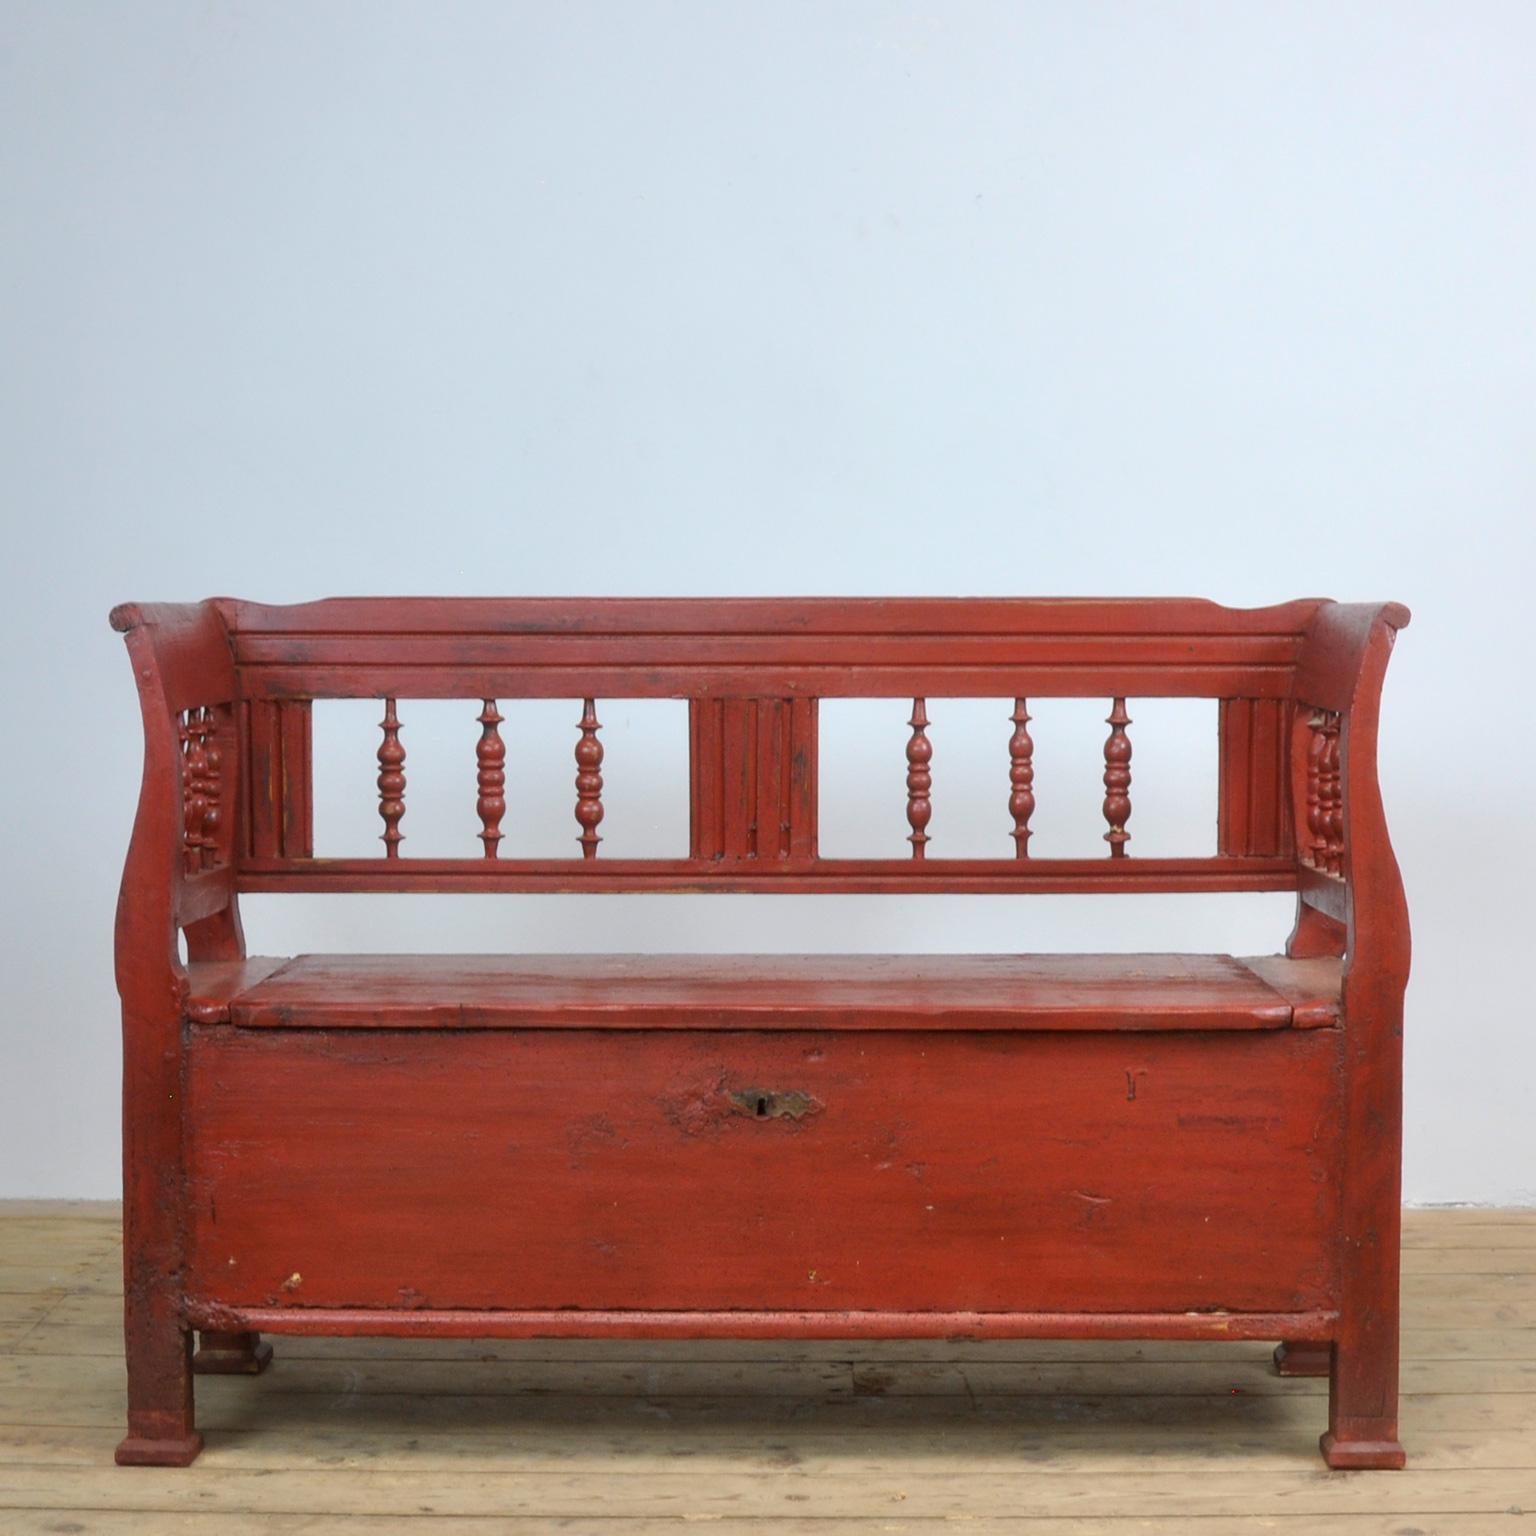 A charming box bench from Hungary, painted a striking shade of red. Under the seat a storage space.